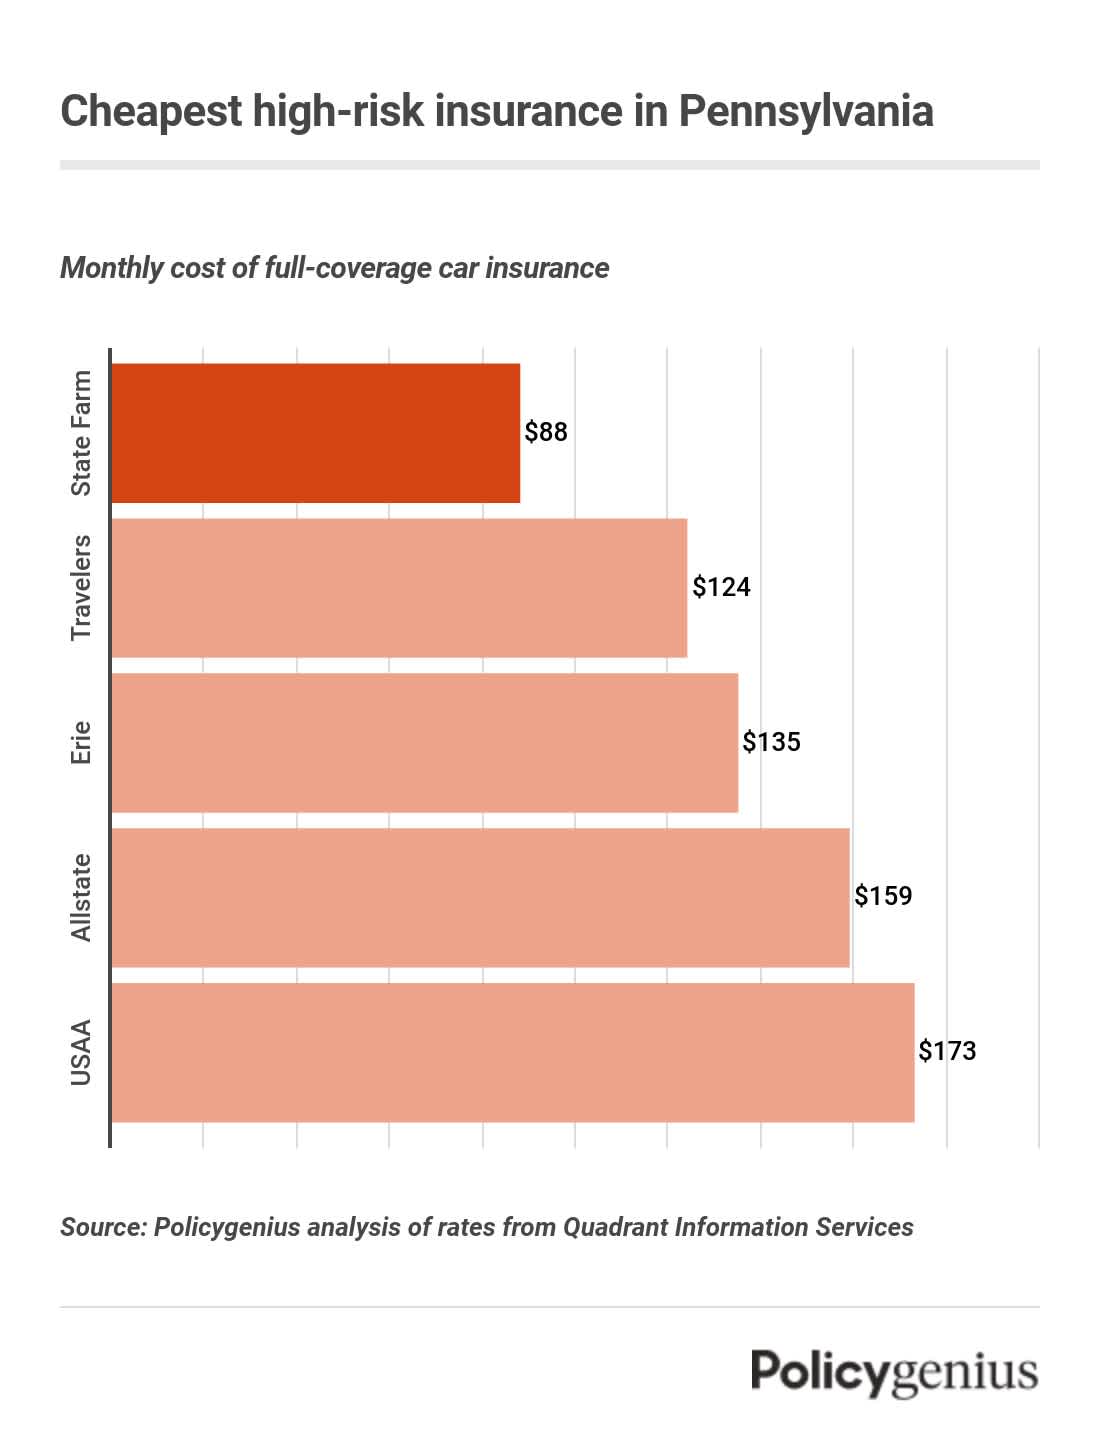 A bar graph showing the cheapest car insurance in Pennsylvania for drivers with a high-risk record.